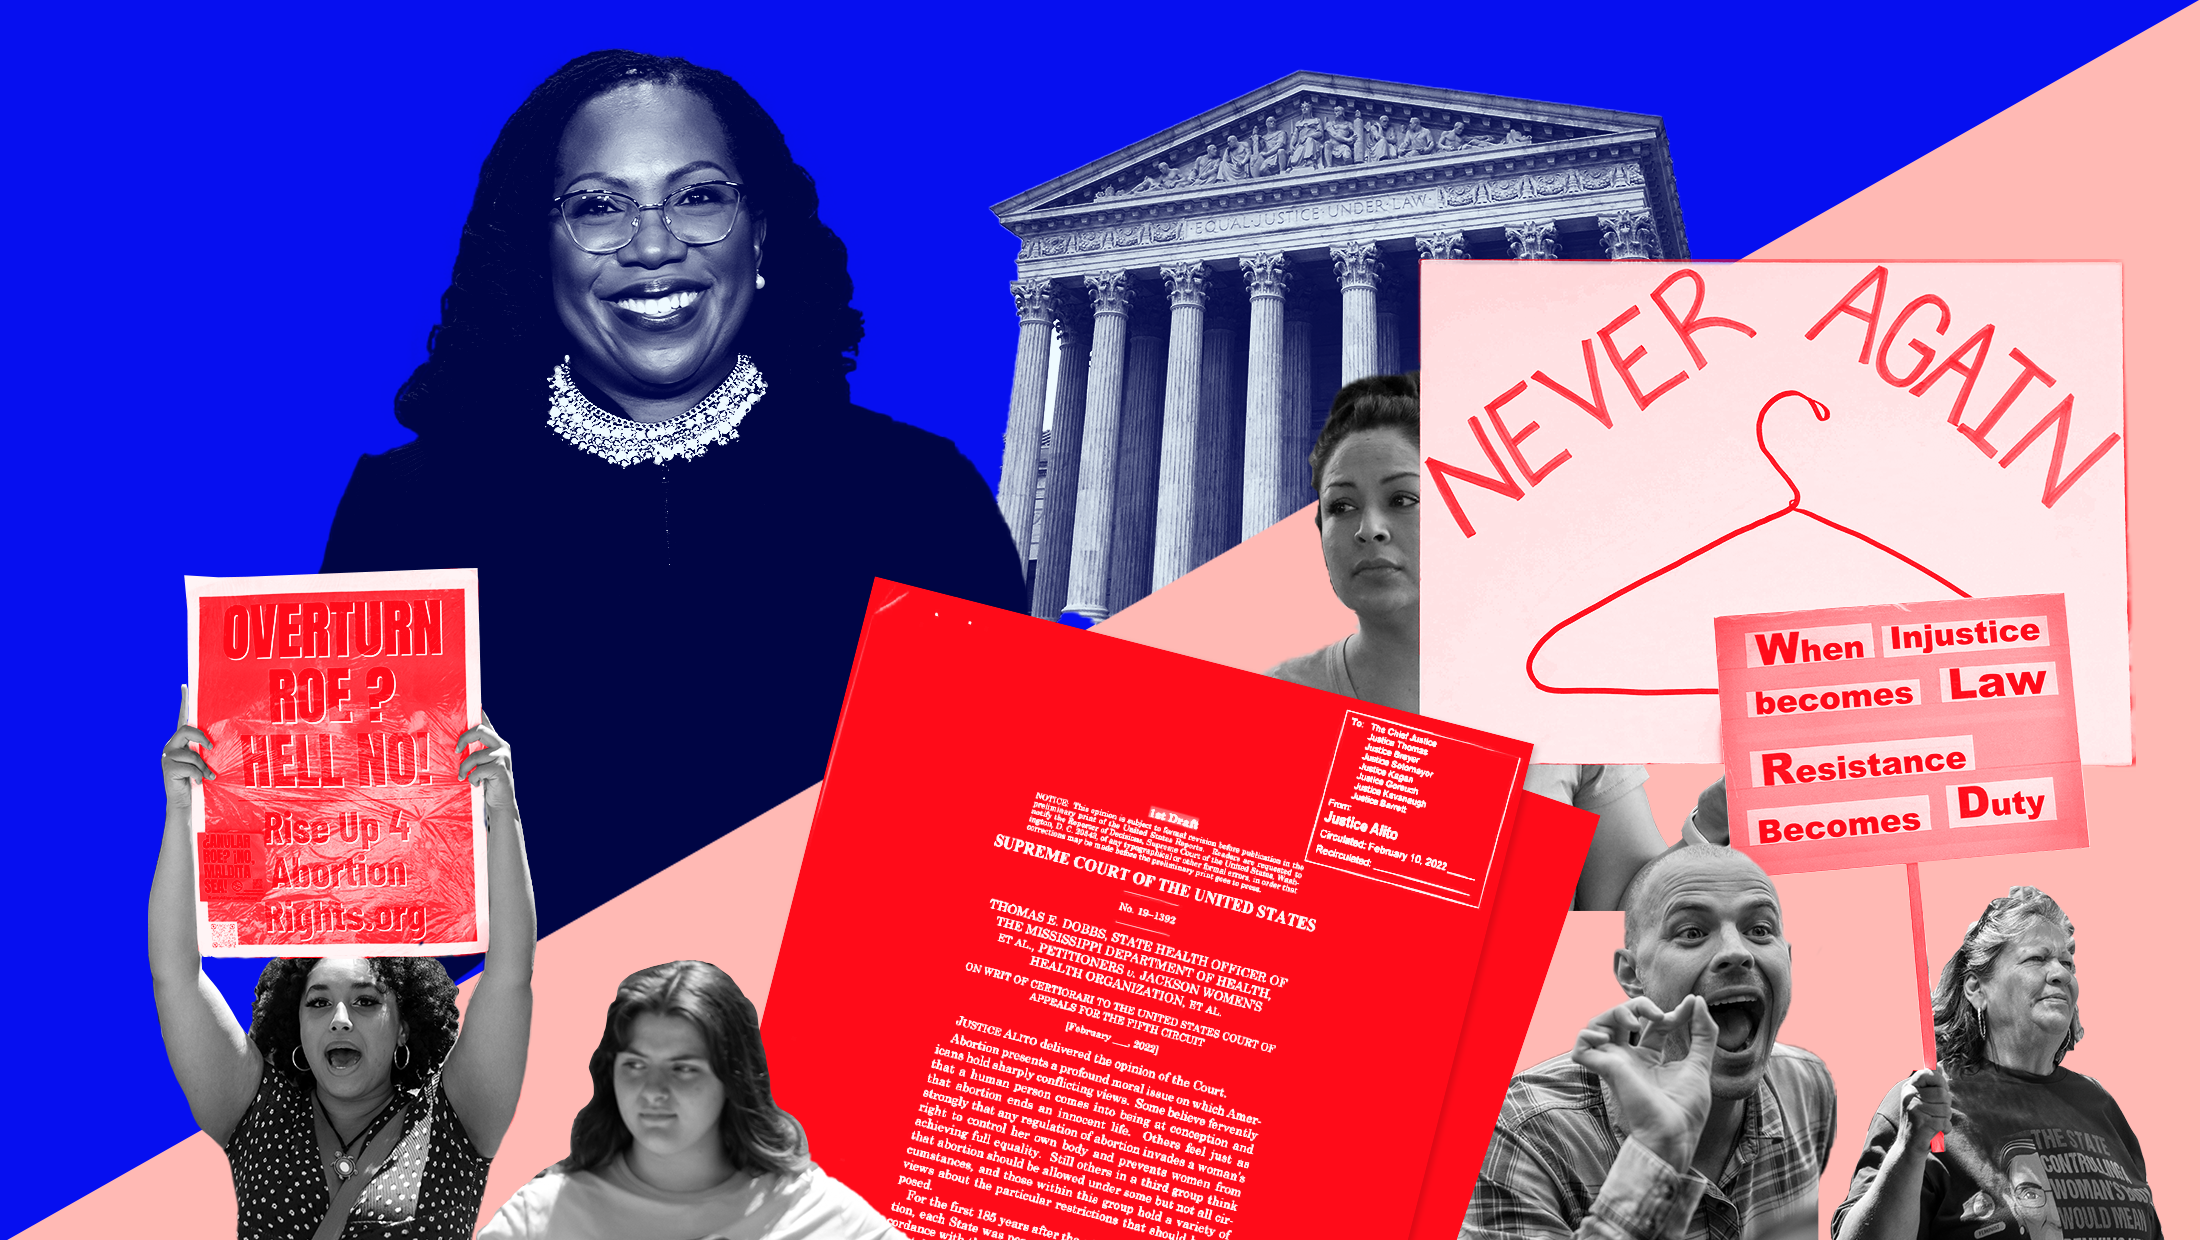 Split background with one side blue and an image of Justice Ketanji Brown Jackson and the Supreme Court and the other side red with the Dobbs opinion and people holding up signs in protest that read "Overturn Roe? Hell No," "Never Again," and "When injustice becomes law resistance becomes duty."